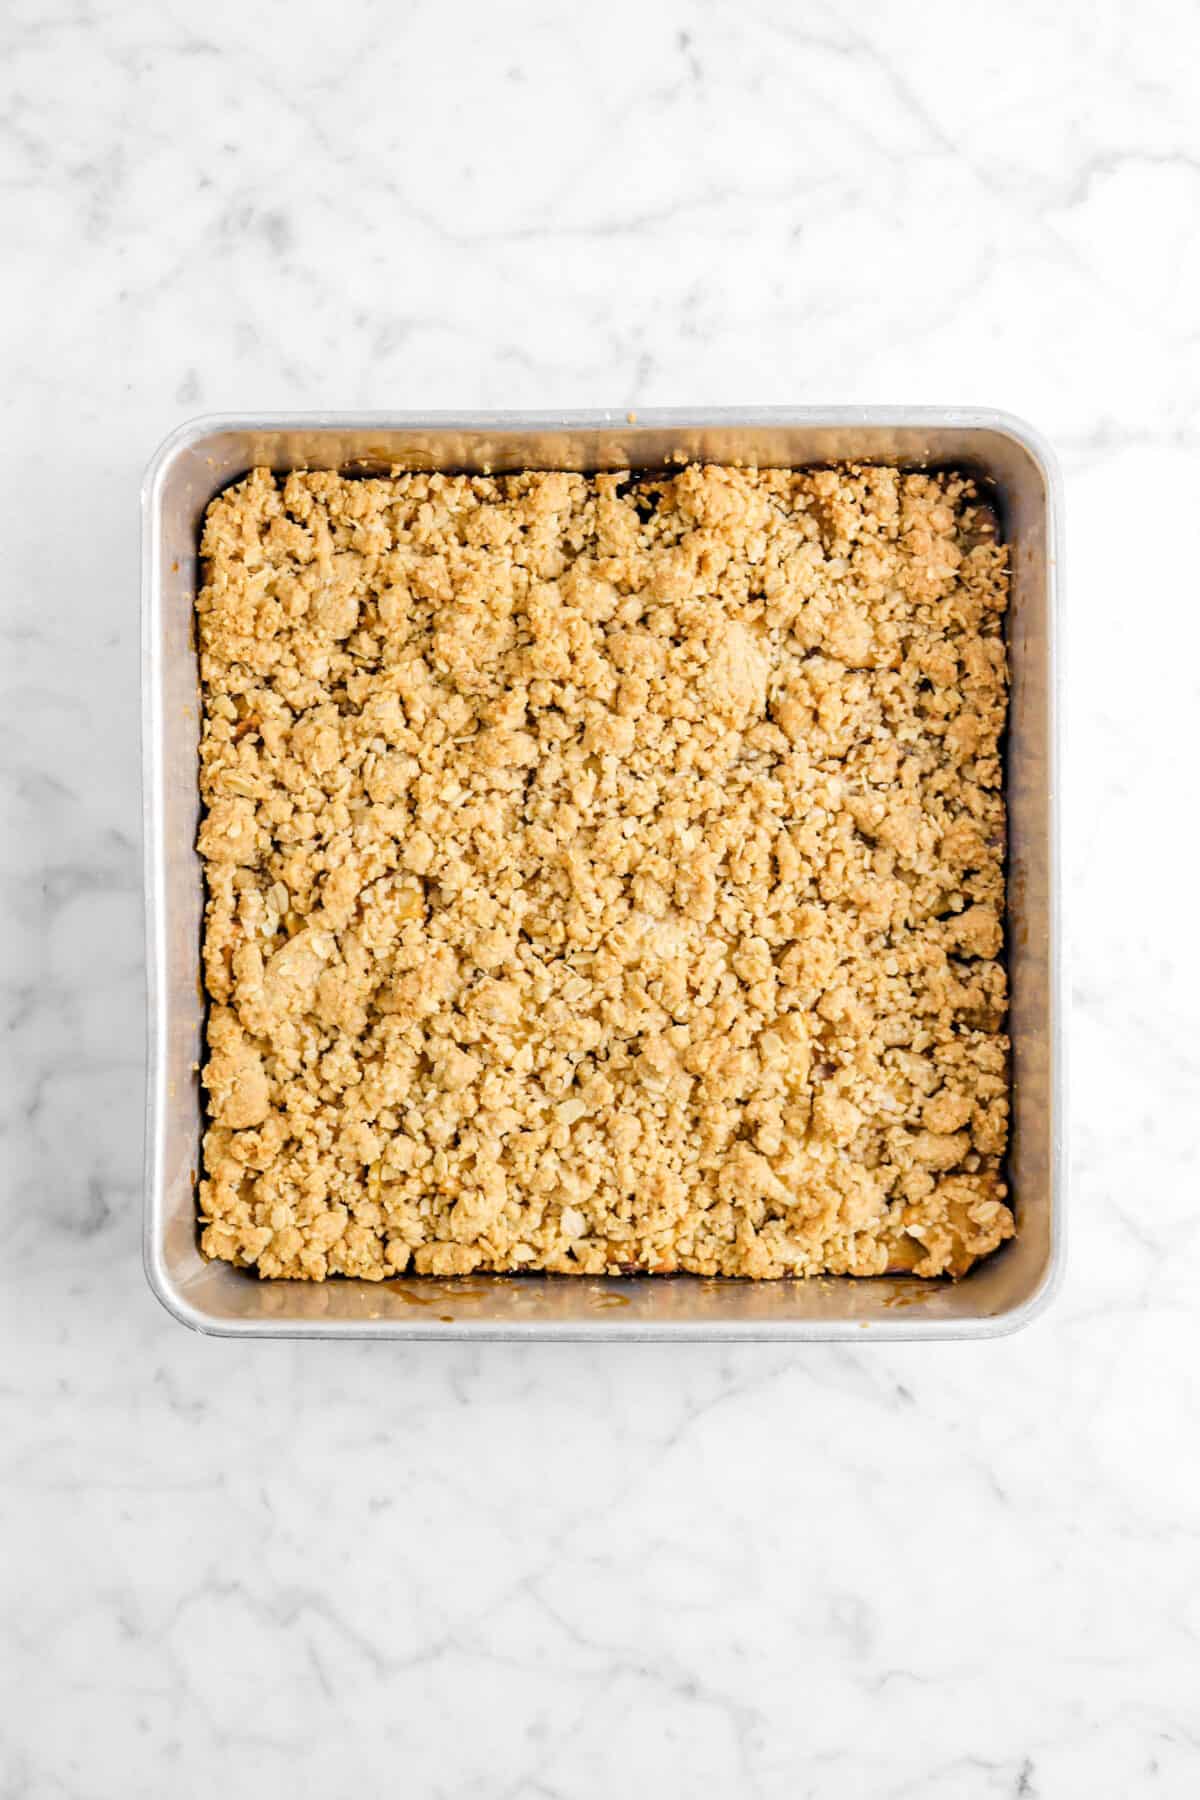 crumble bars baked in a square pan